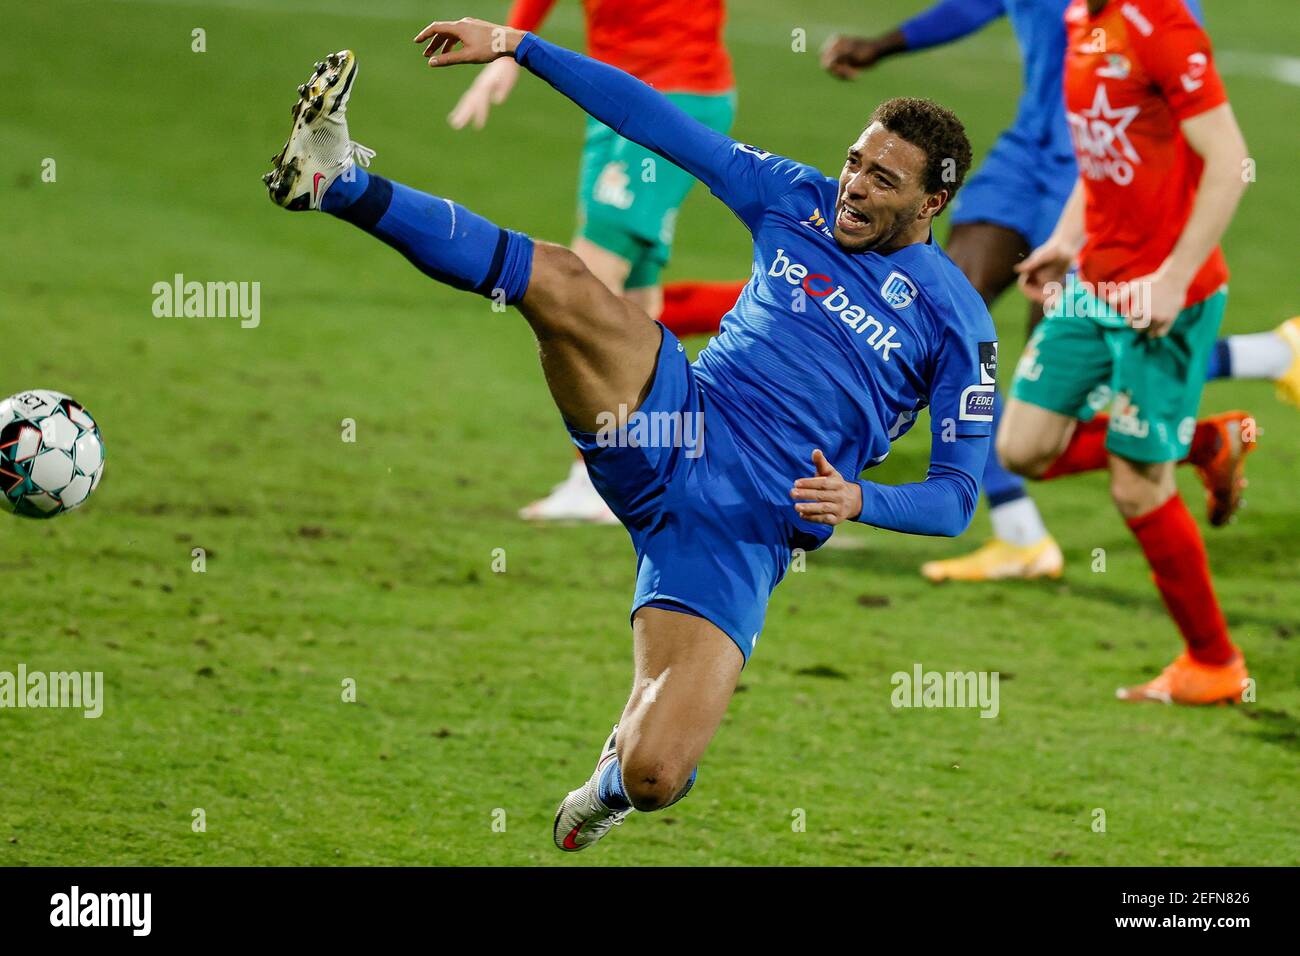 Genk's Cyriel Dessers pictured in action during a soccer match between KV Oostende and KRC Genk, Wednesday 17 February 2021 in Oostende, a postponed g Stock Photo